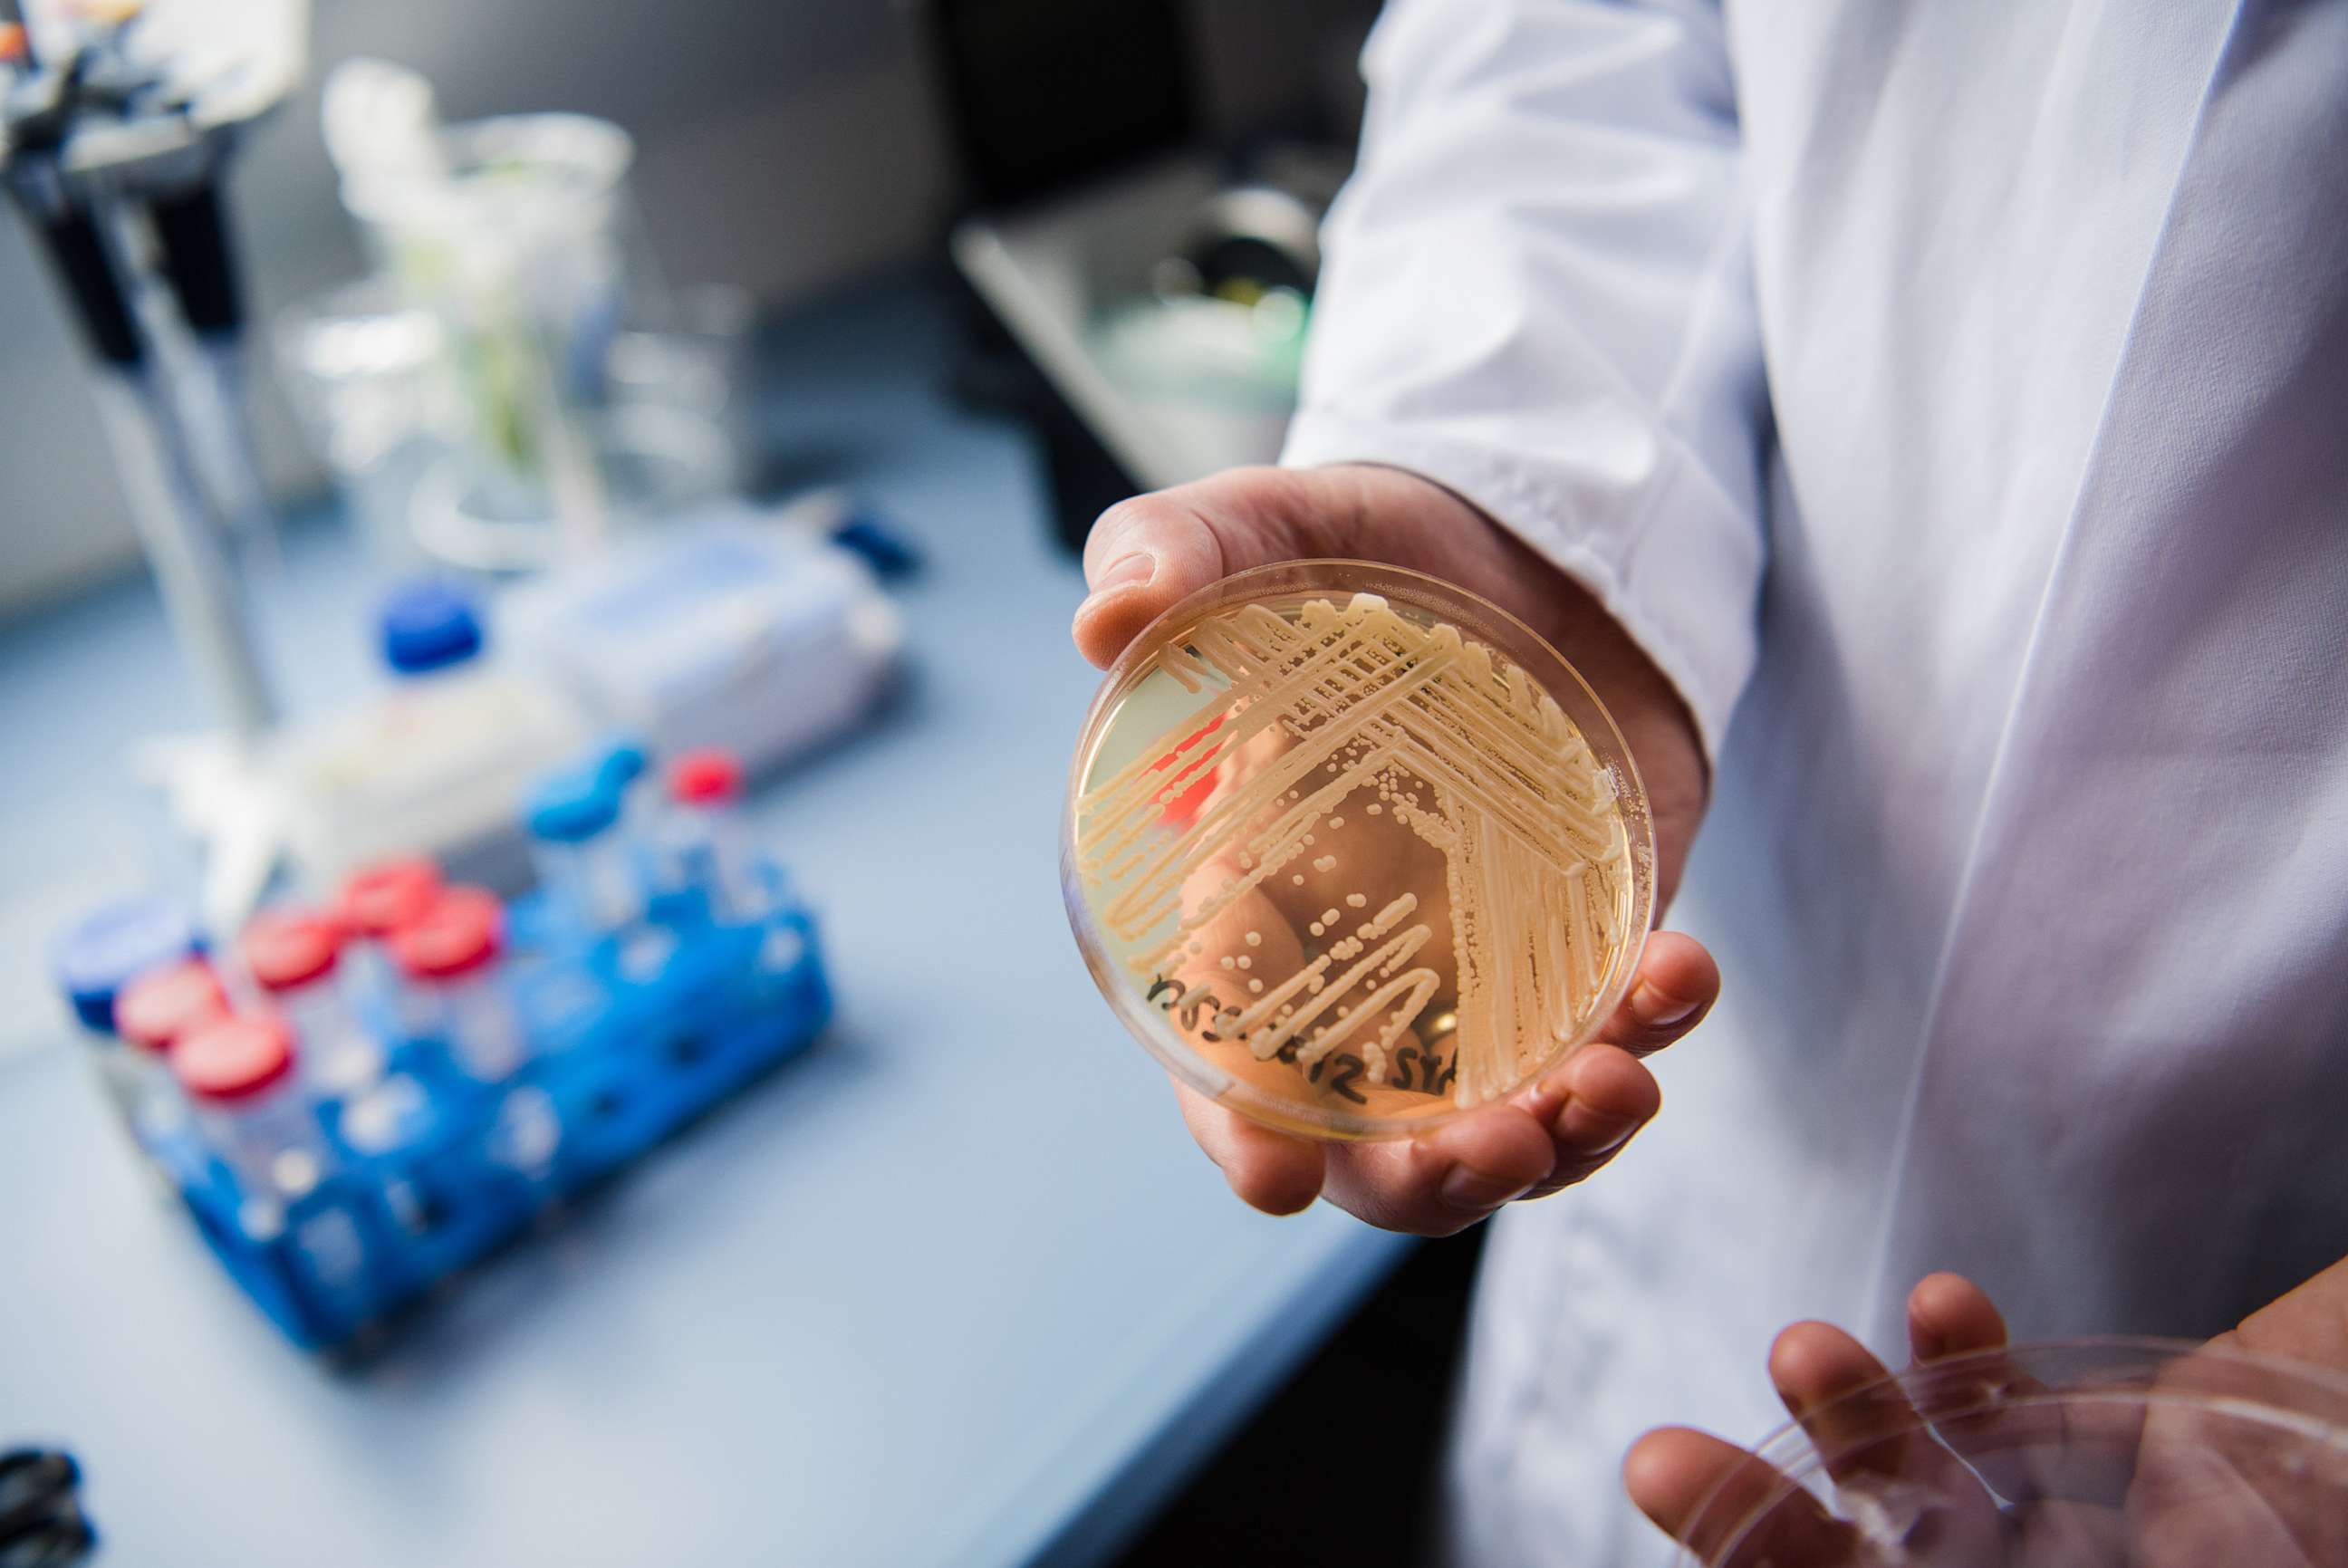 PHOTO: The director of the National Reference Centre for Invasive Fungus Infections, Oliver Kurzai, holdsa petri dish containing the yeast candida auris, Jan. 23, 2018, in Wuerzburg, Germany.